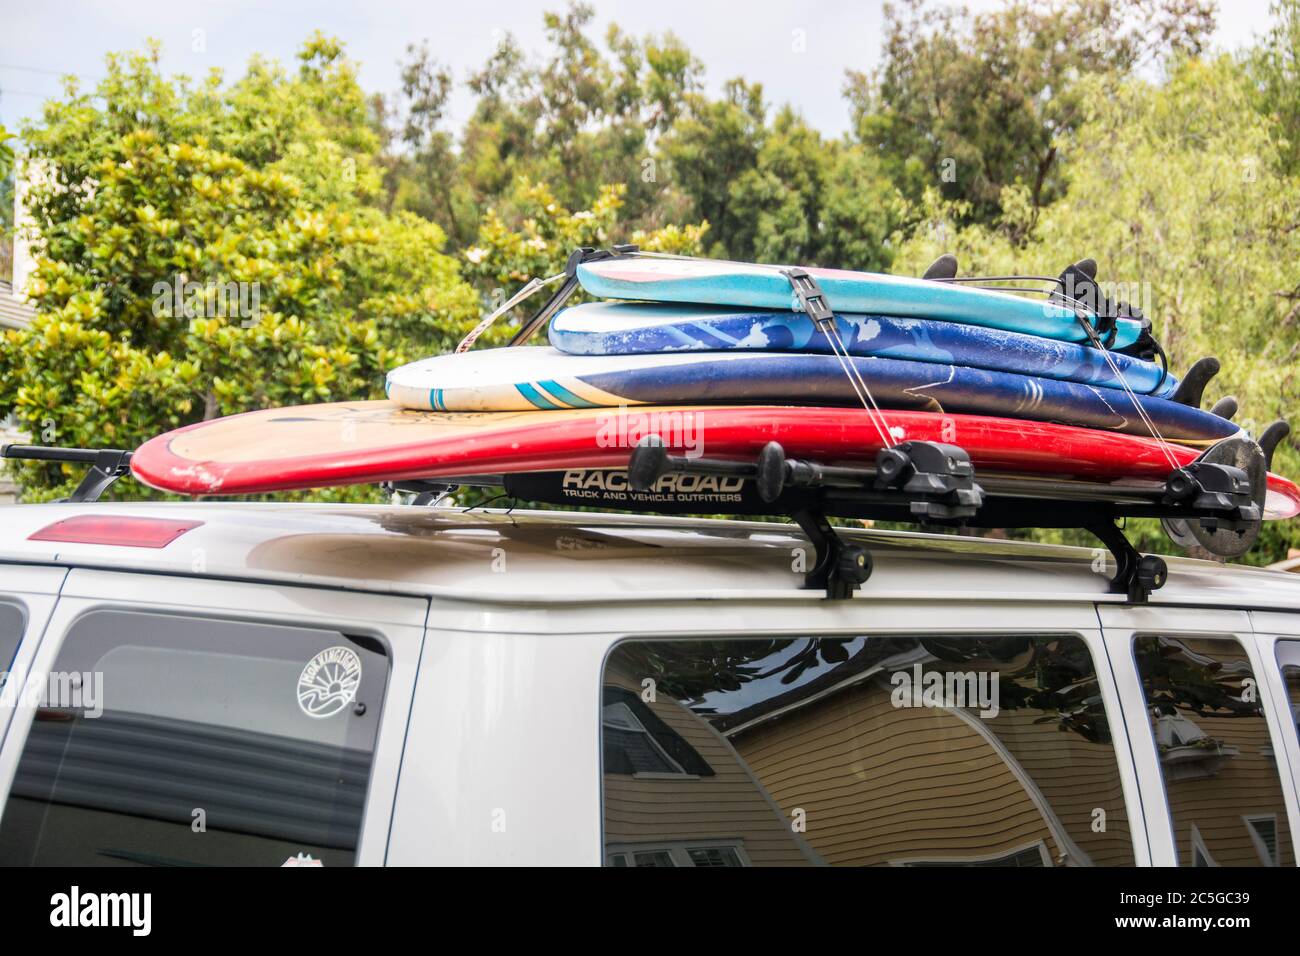 A stack of surfboards on top of a van; Mission Viejo, California. Stock Photo